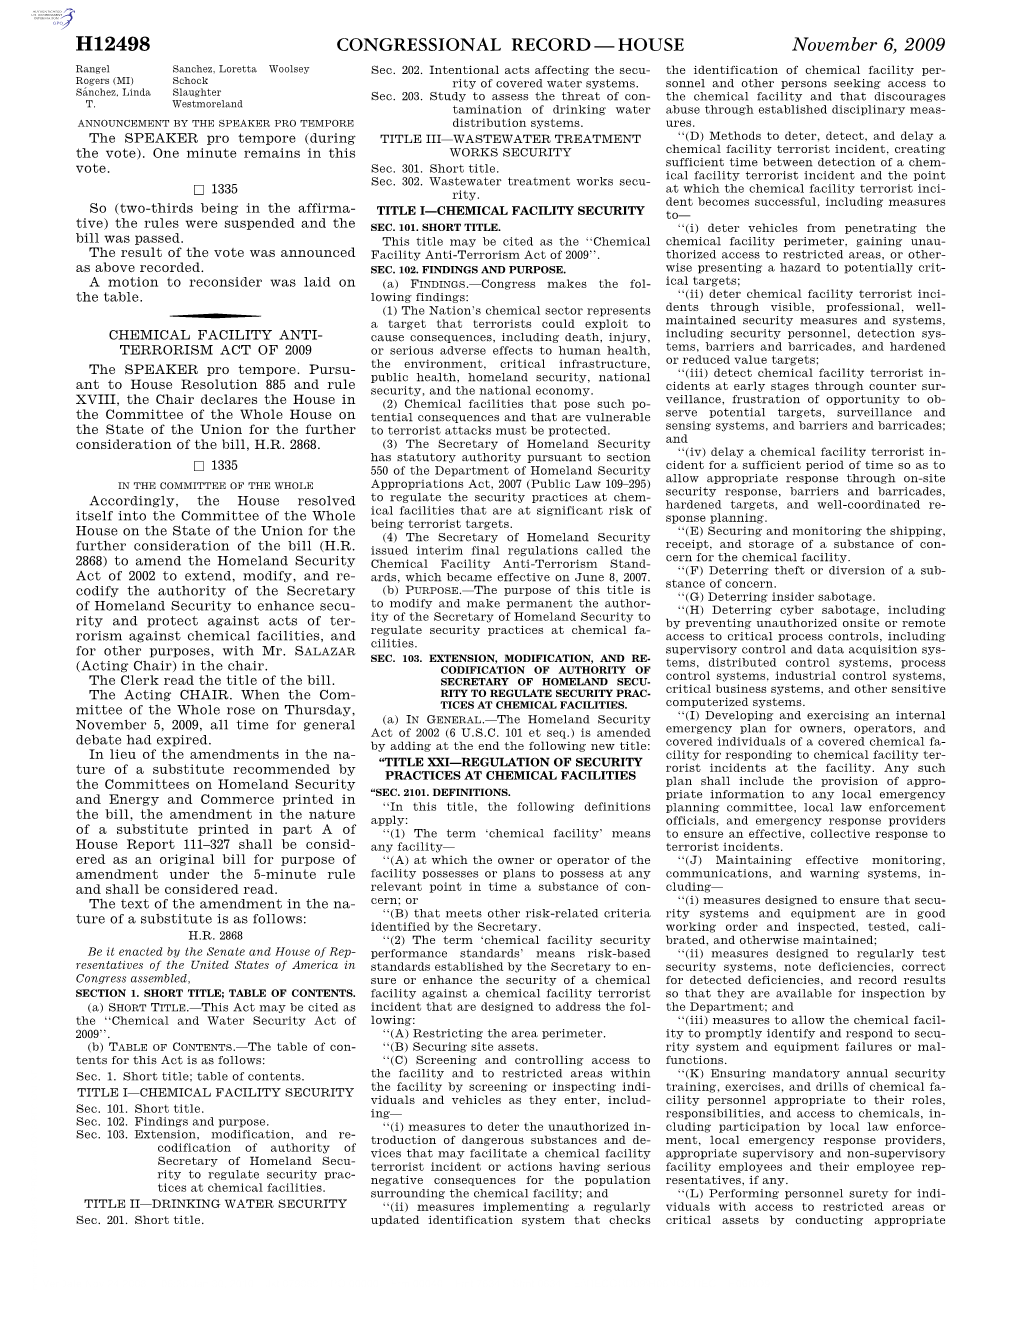 Congressional Record—House H12498